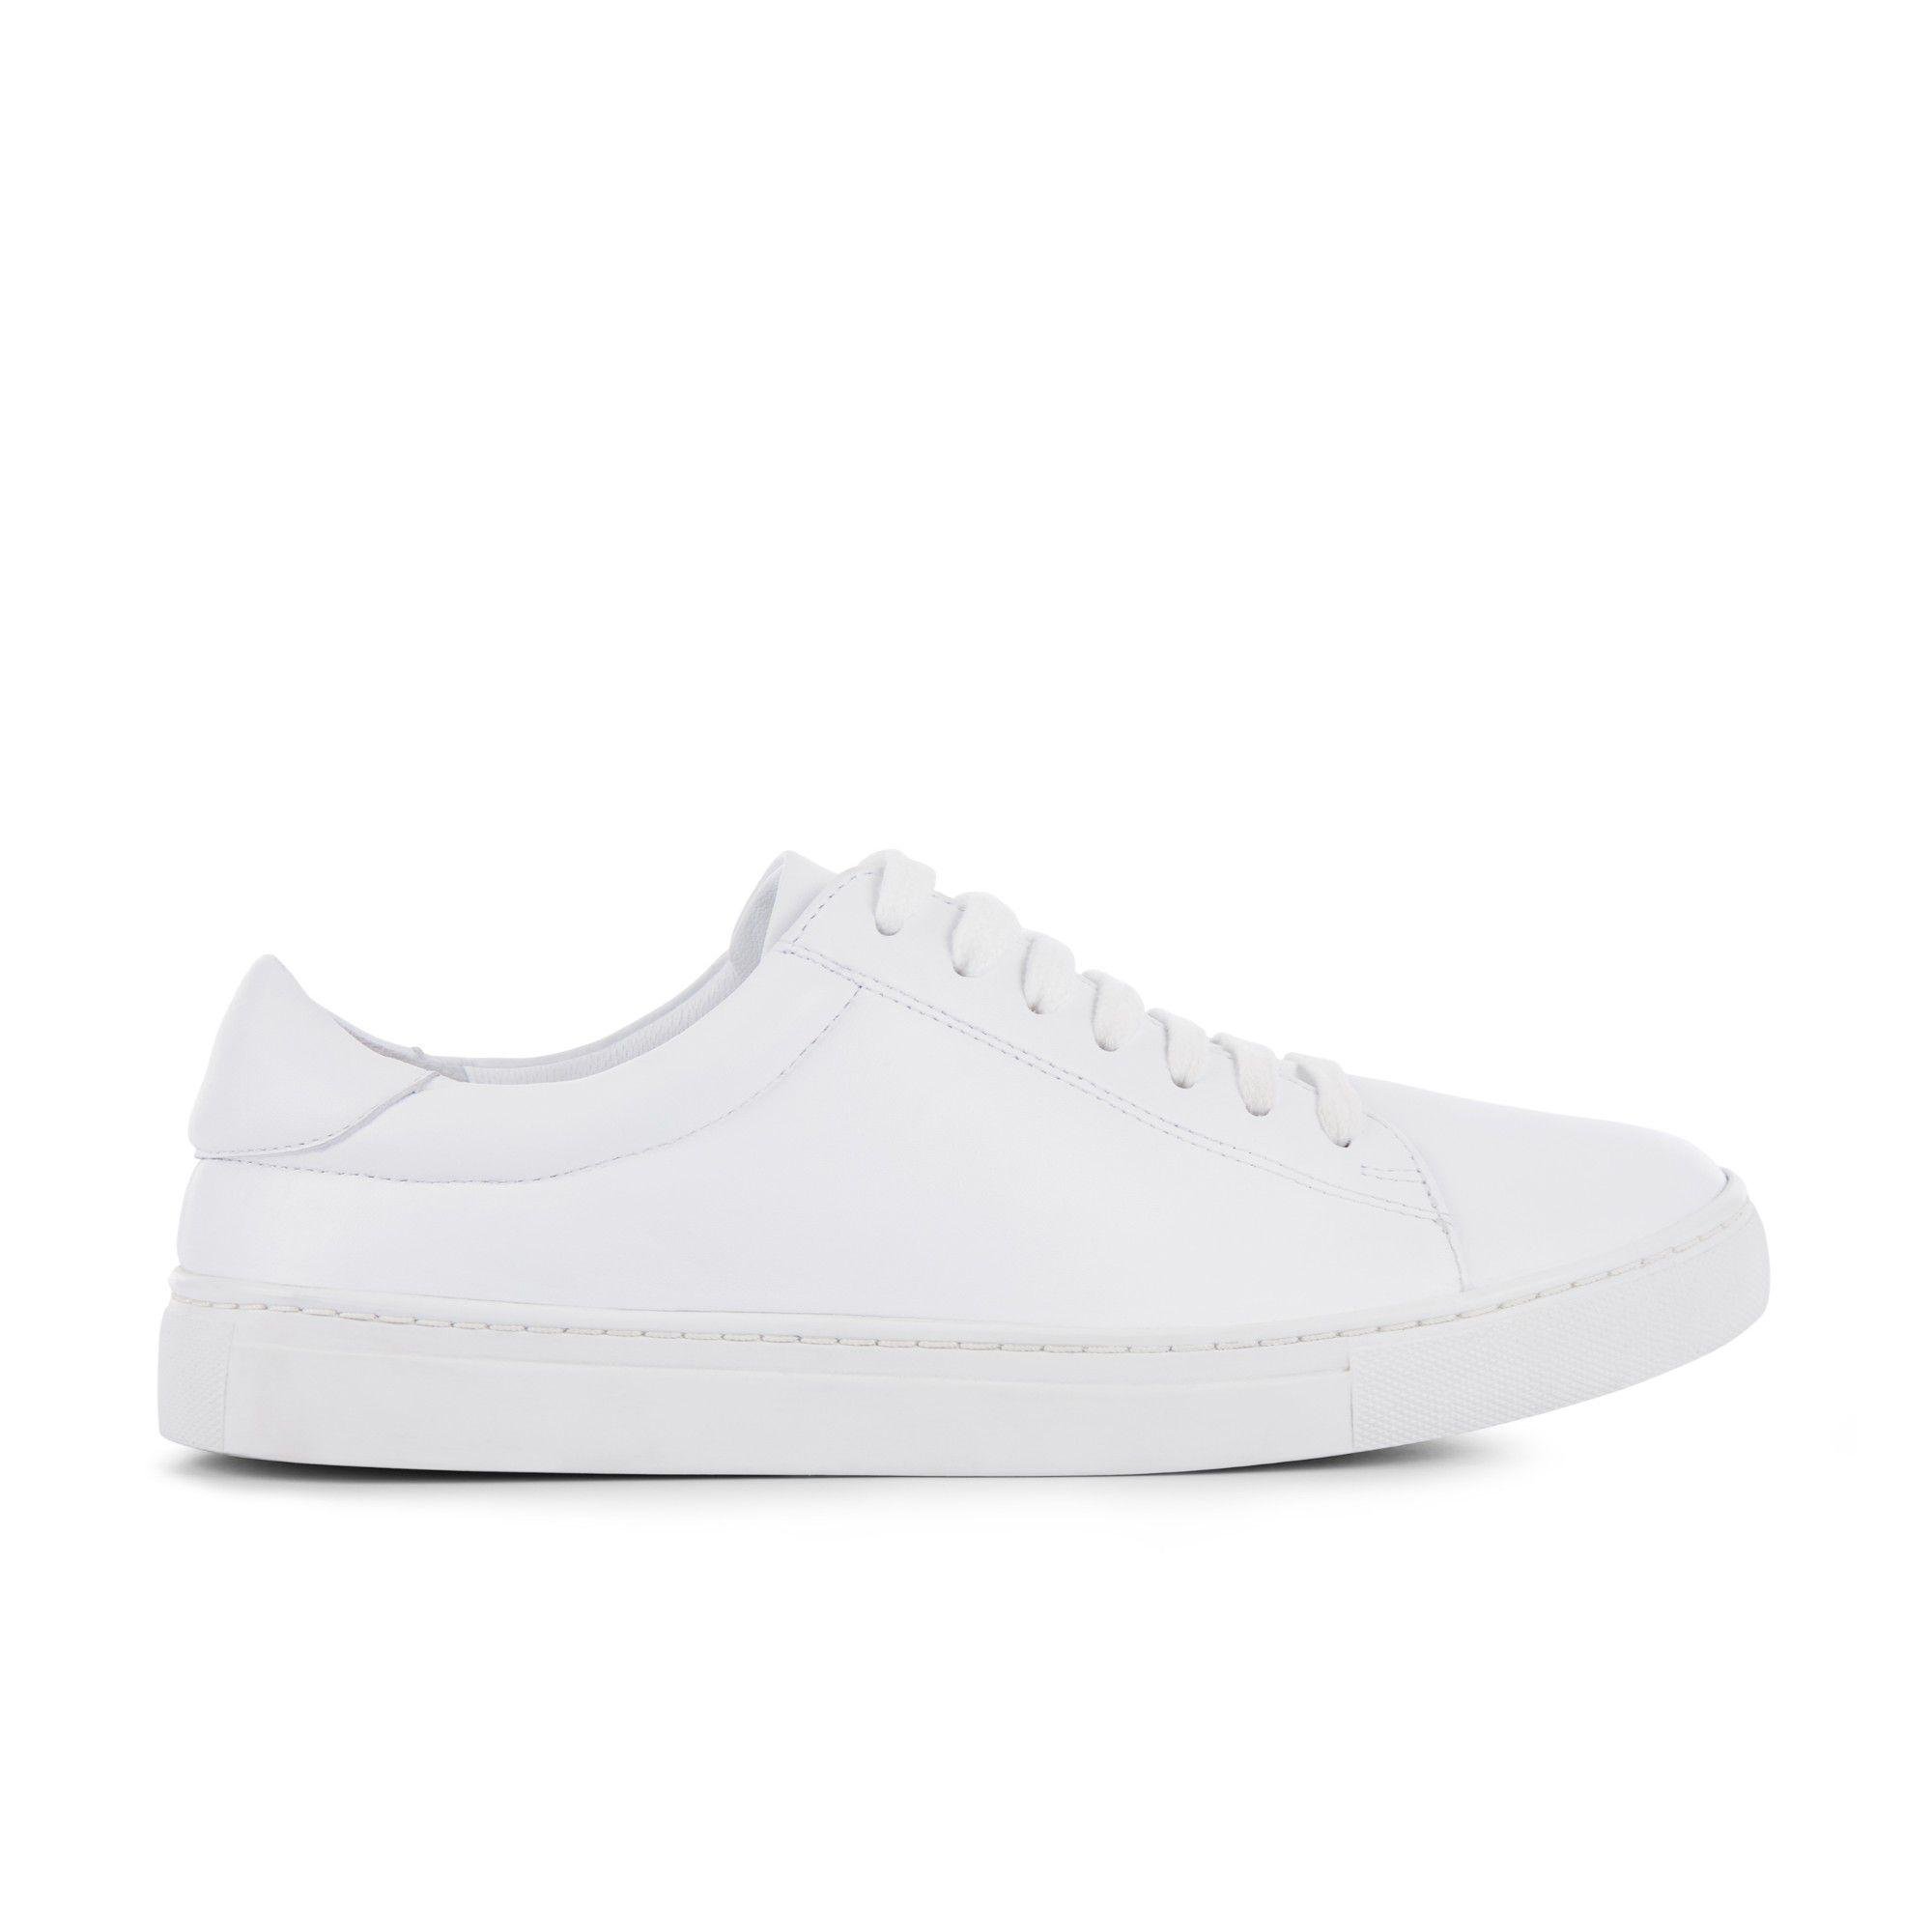 Hobbs Leather 'hollie' Trainers in White - Lyst